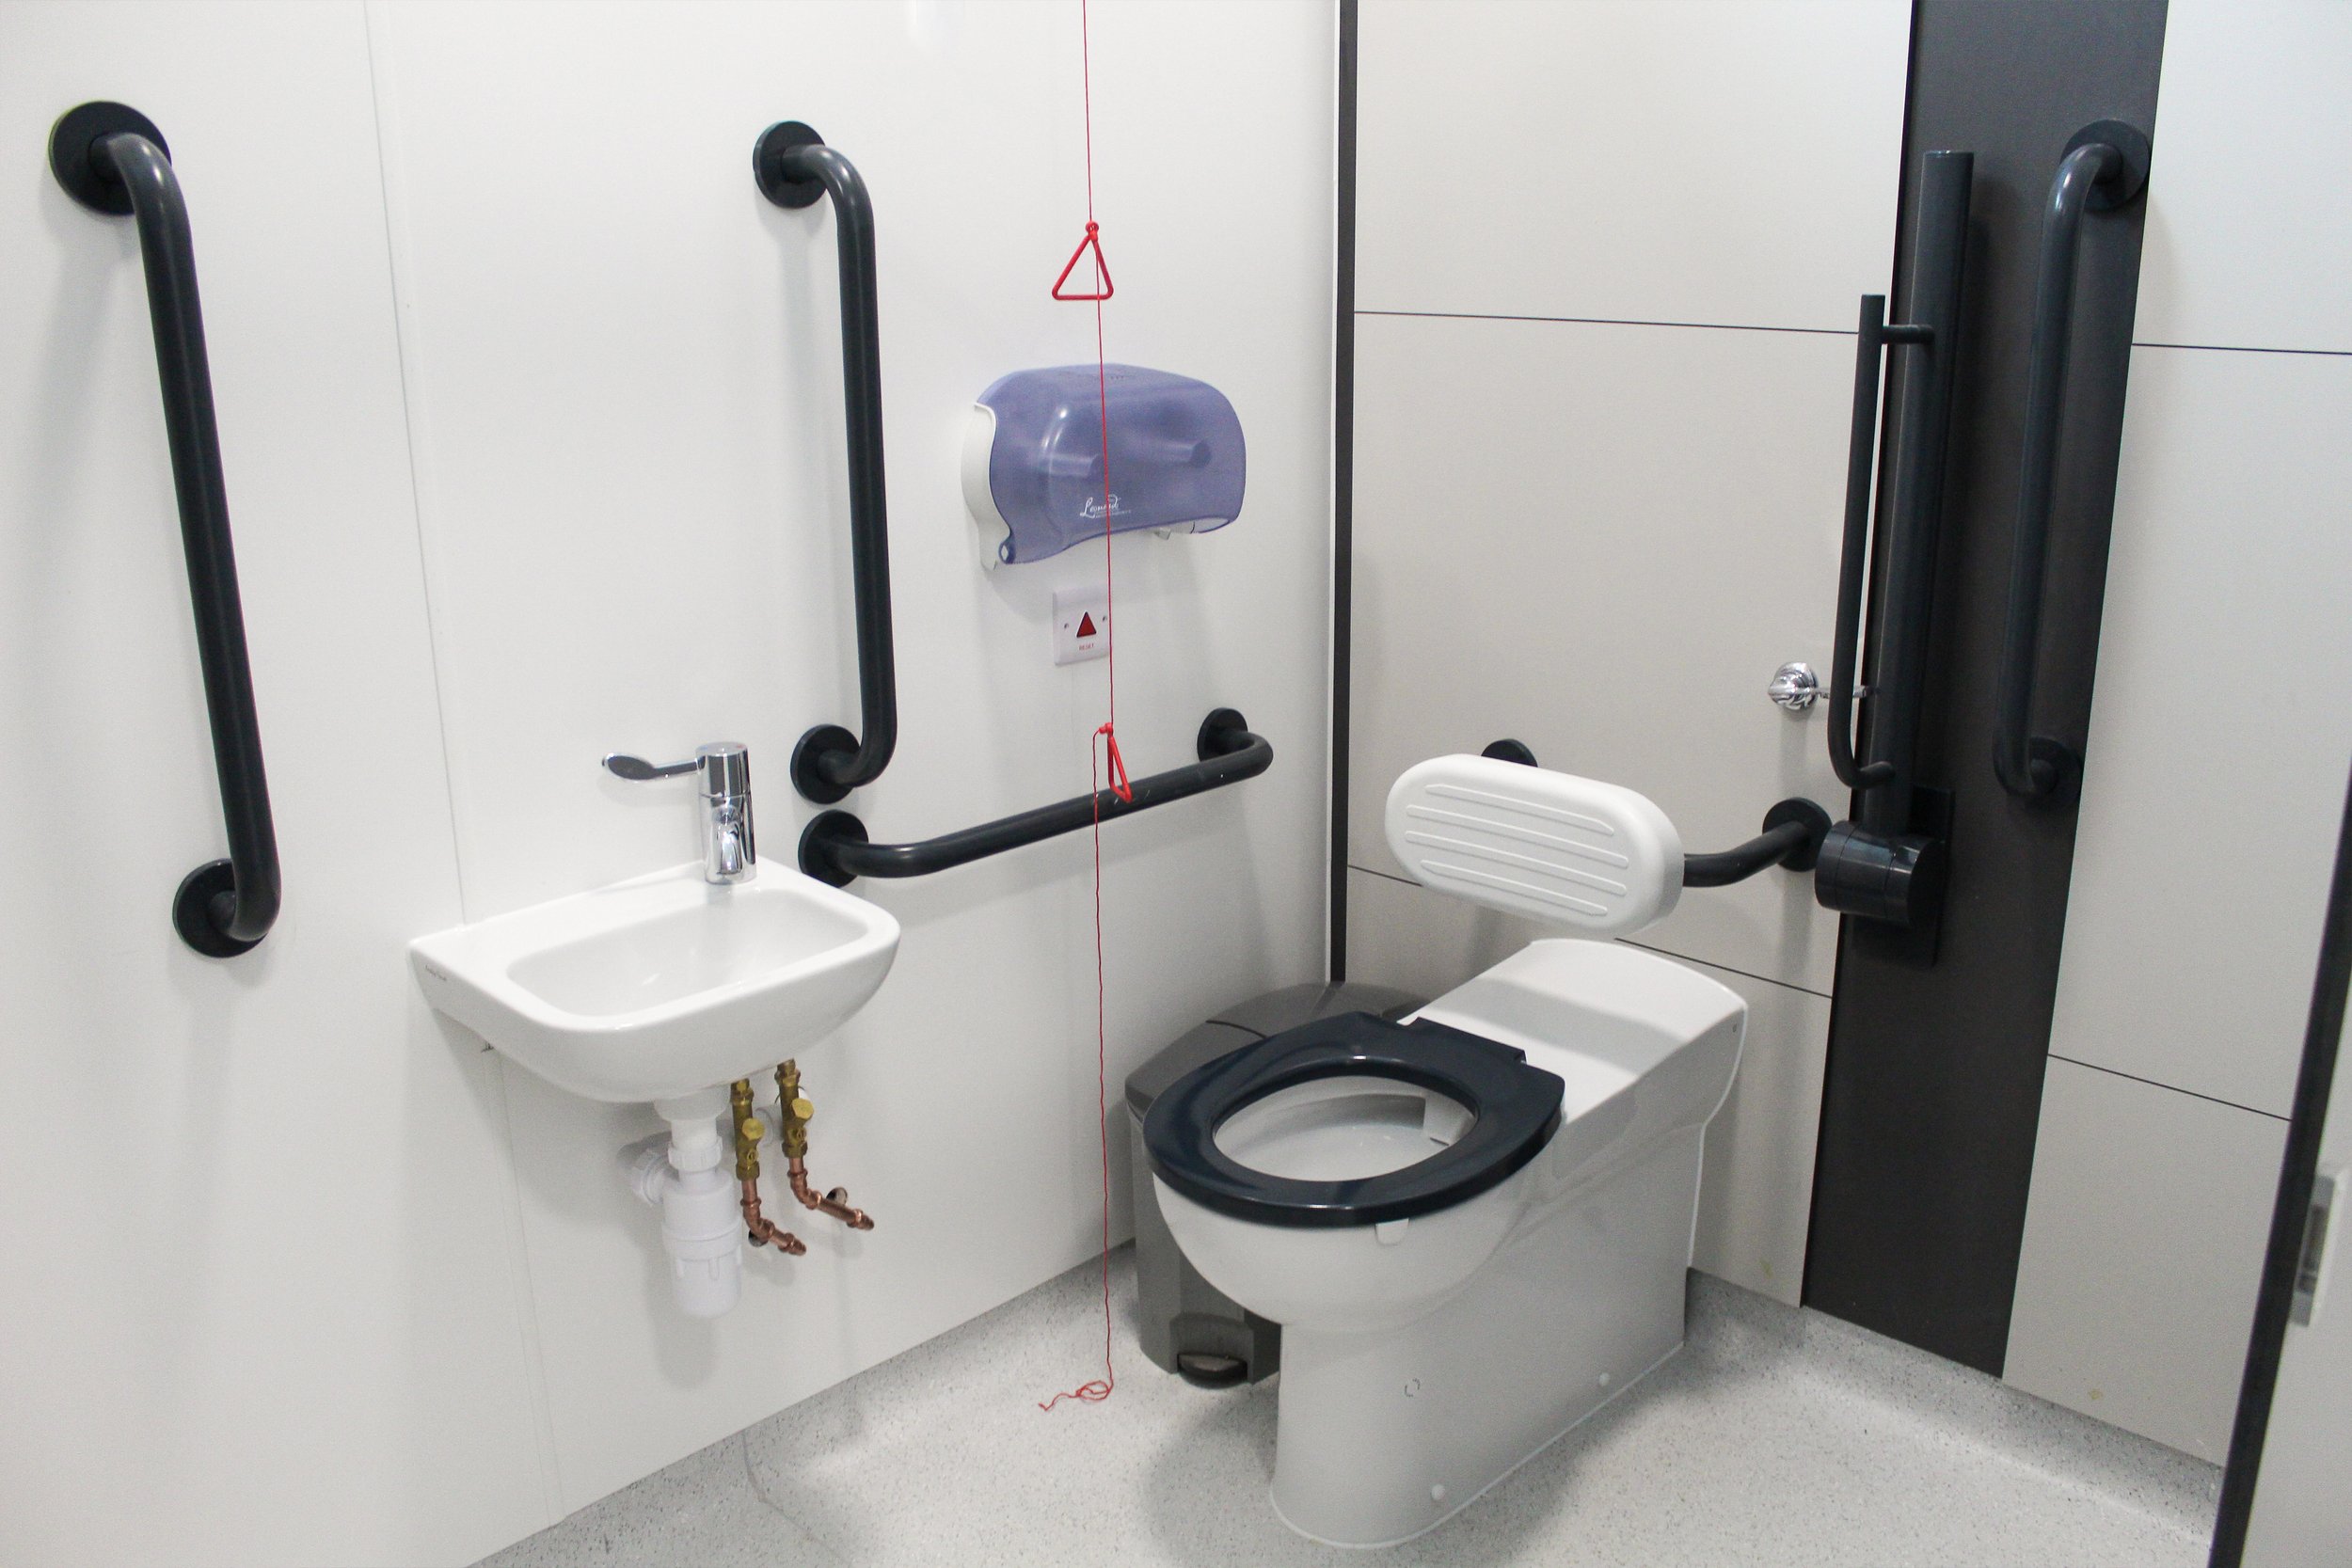 Accessible toilet with basin at southgate.jpg